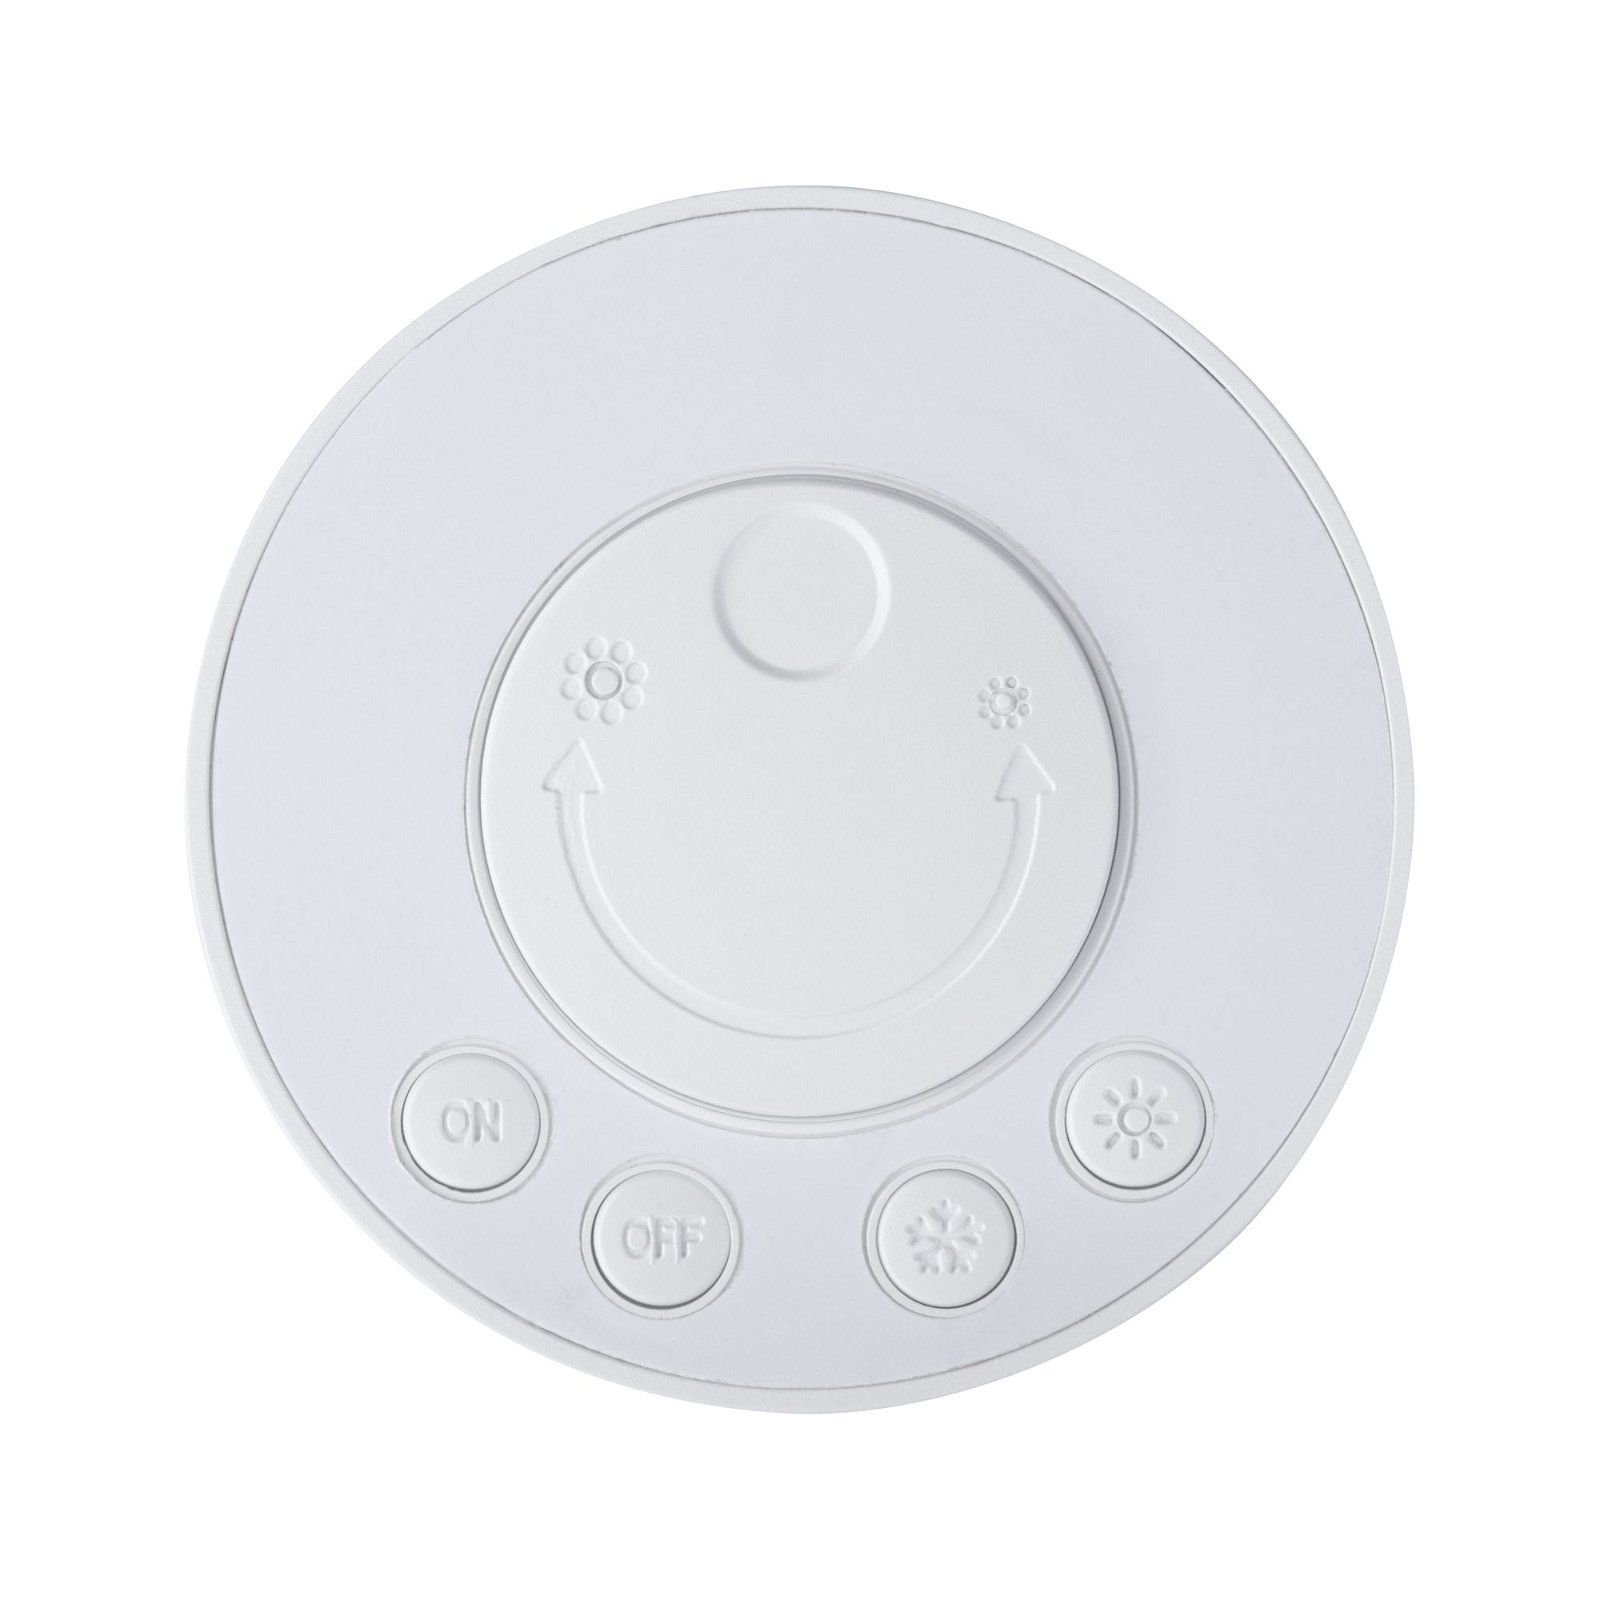 Clever Connect Accessories Switch Bowl Tunable White Matt white